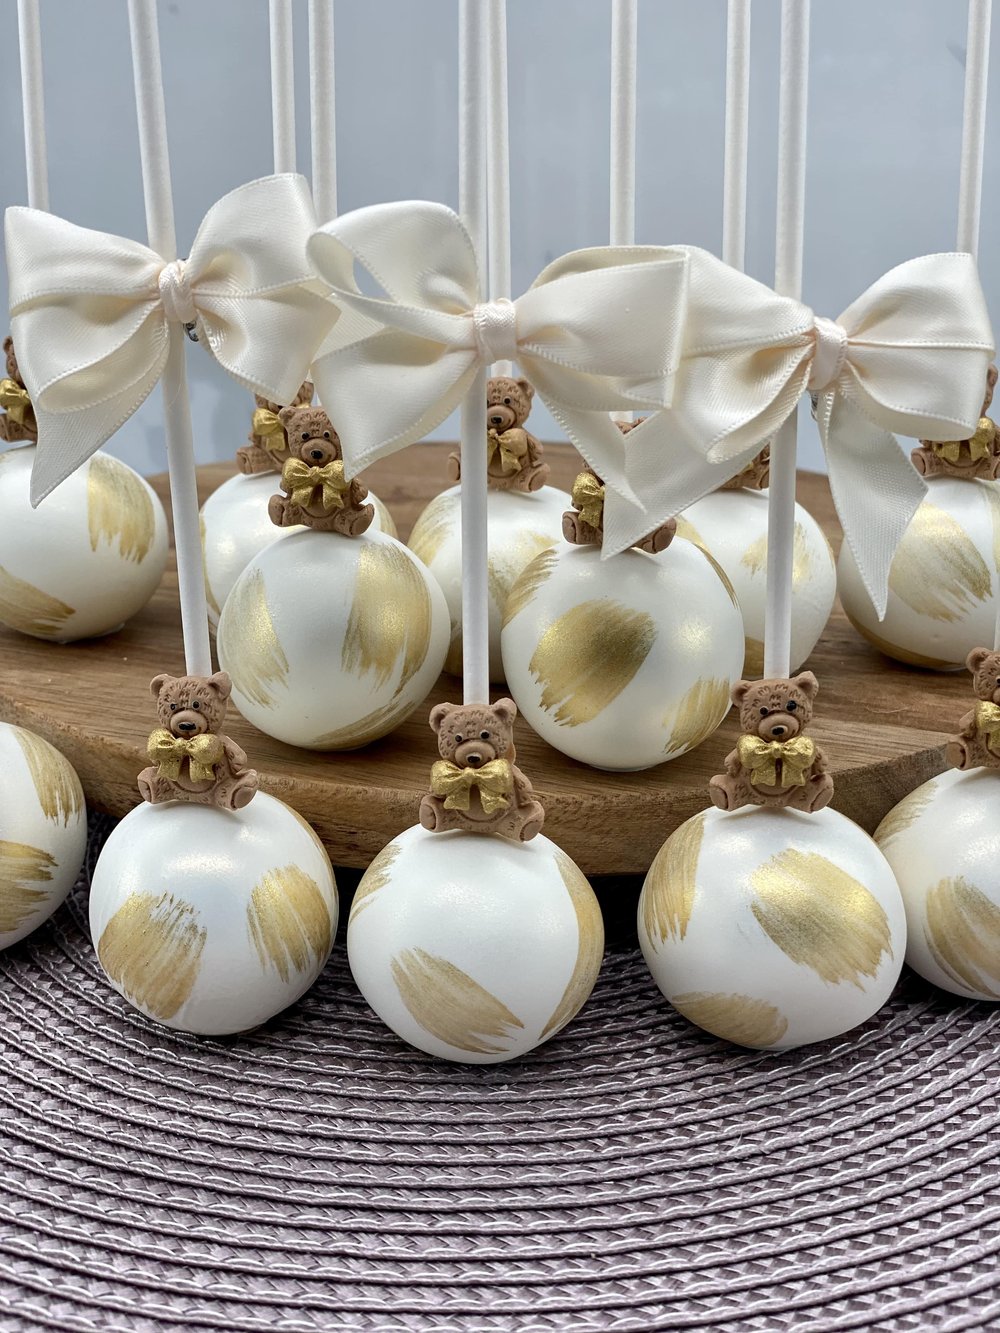 Baby Shower Cakepops with gold accents. Each with a teddybear fondant figure and white satin bow